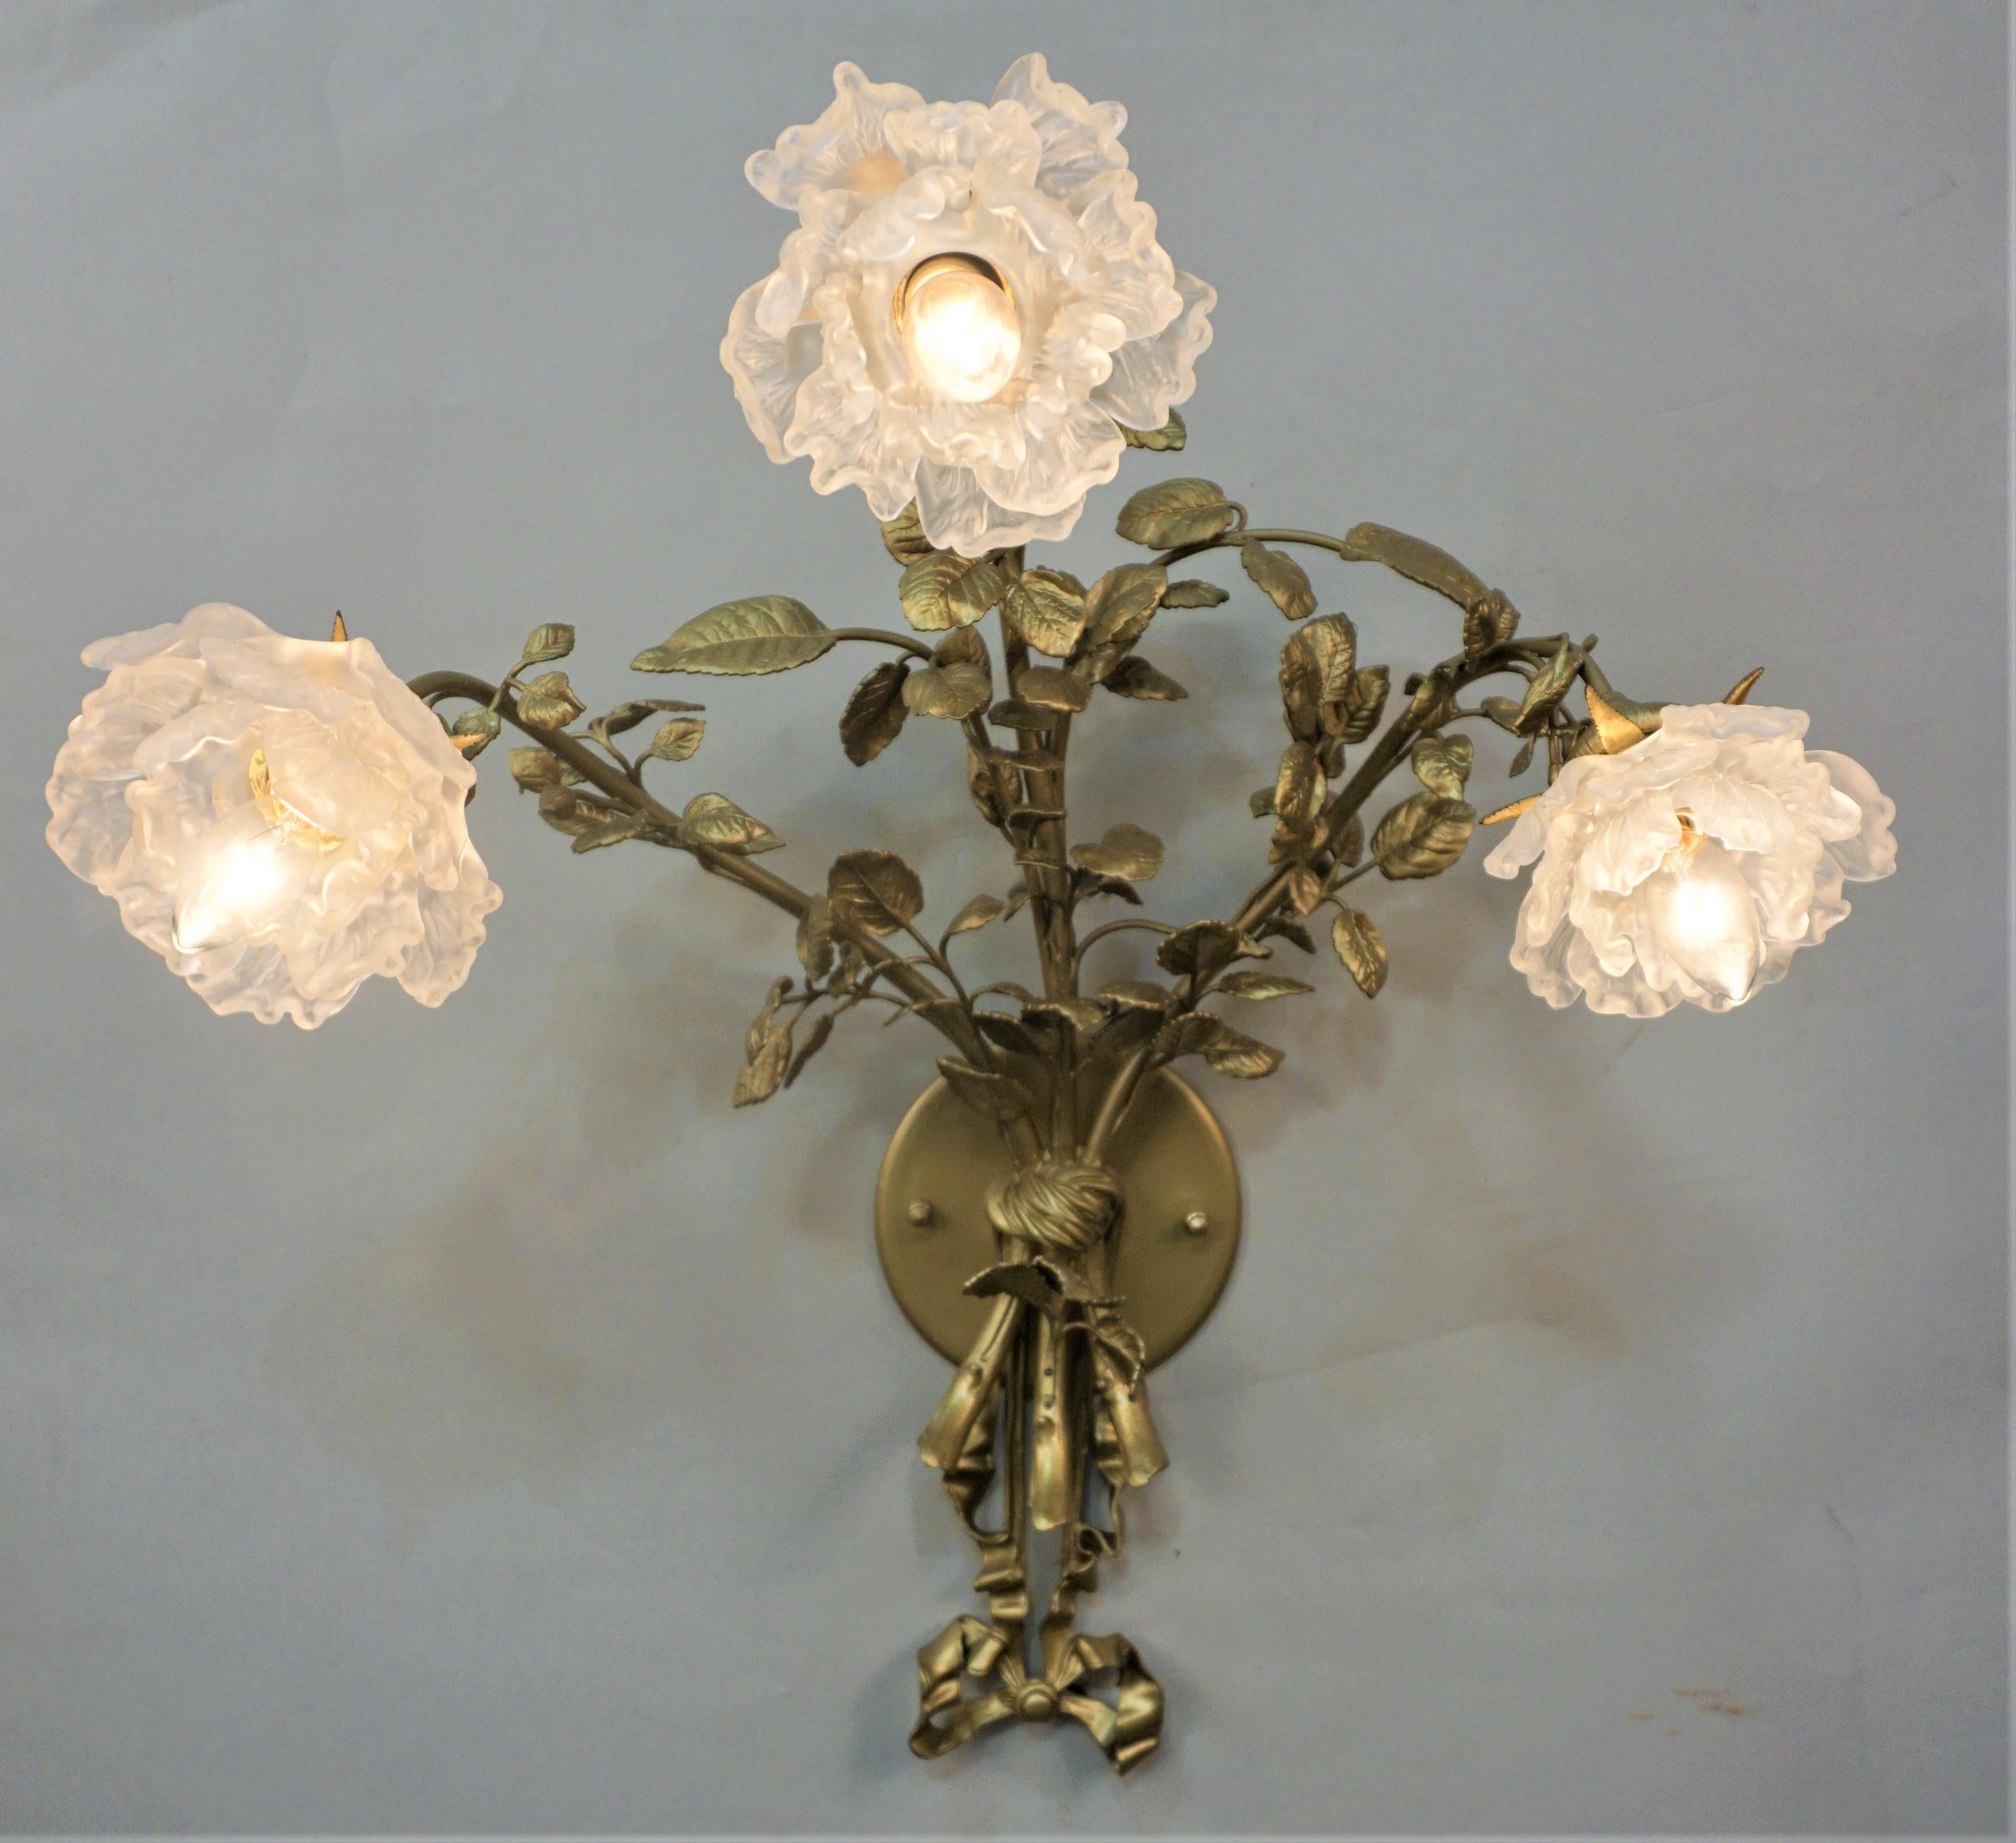 Pair of early 20th century flora design bronze wall sconces with beautiful hand-blown glass shades.